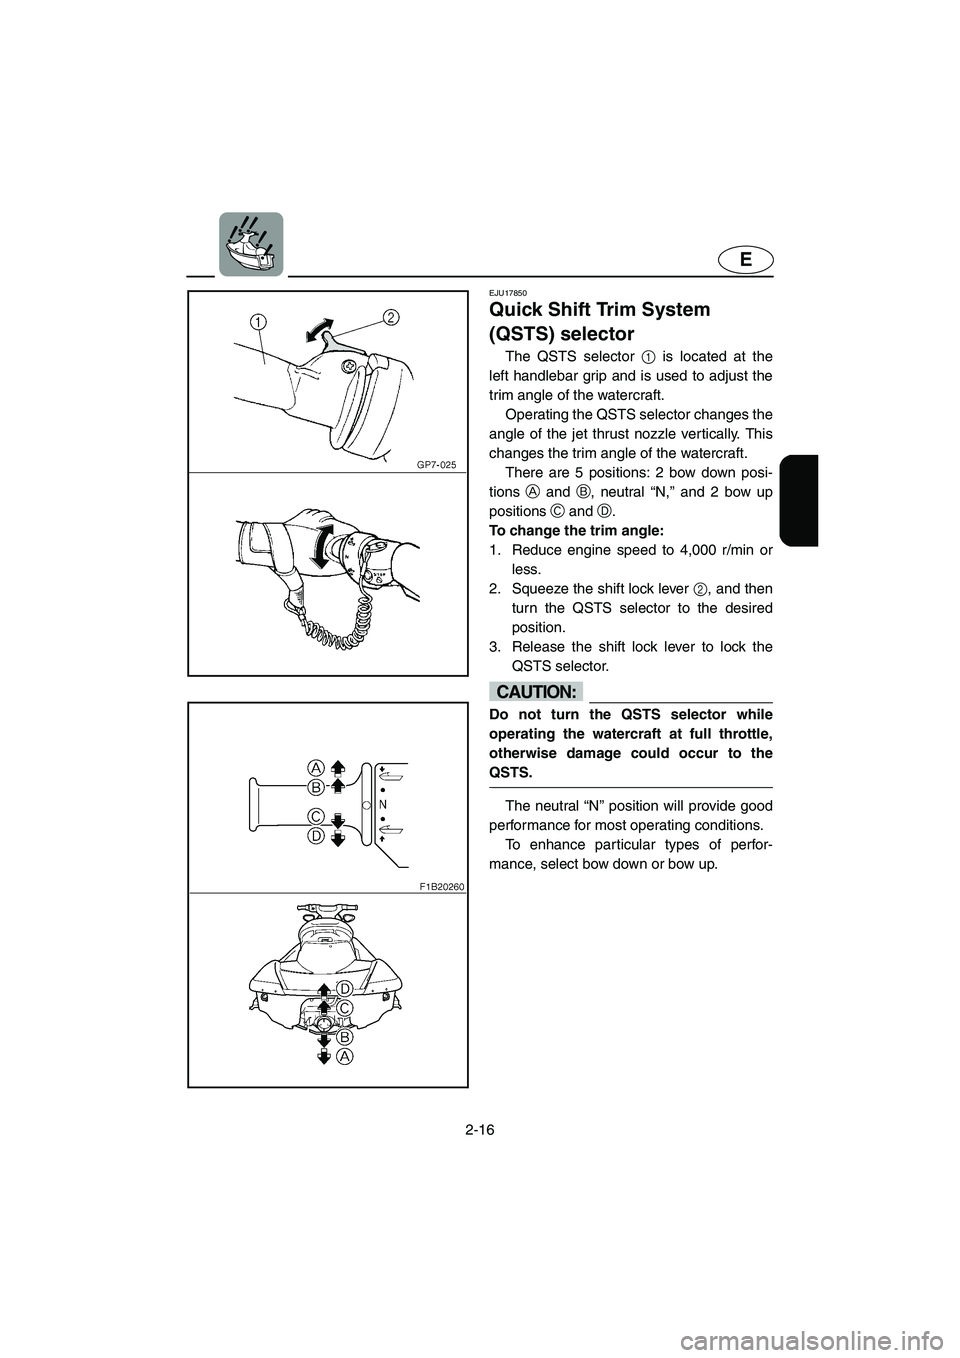 YAMAHA FX HO 2006 Service Manual 2-16
E
EJU17850  
Quick Shift Trim System 
(QSTS) selector  
The QSTS selector 1 is located at the
left handlebar grip and is used to adjust the
trim angle of the watercraft. 
Operating the QSTS selec